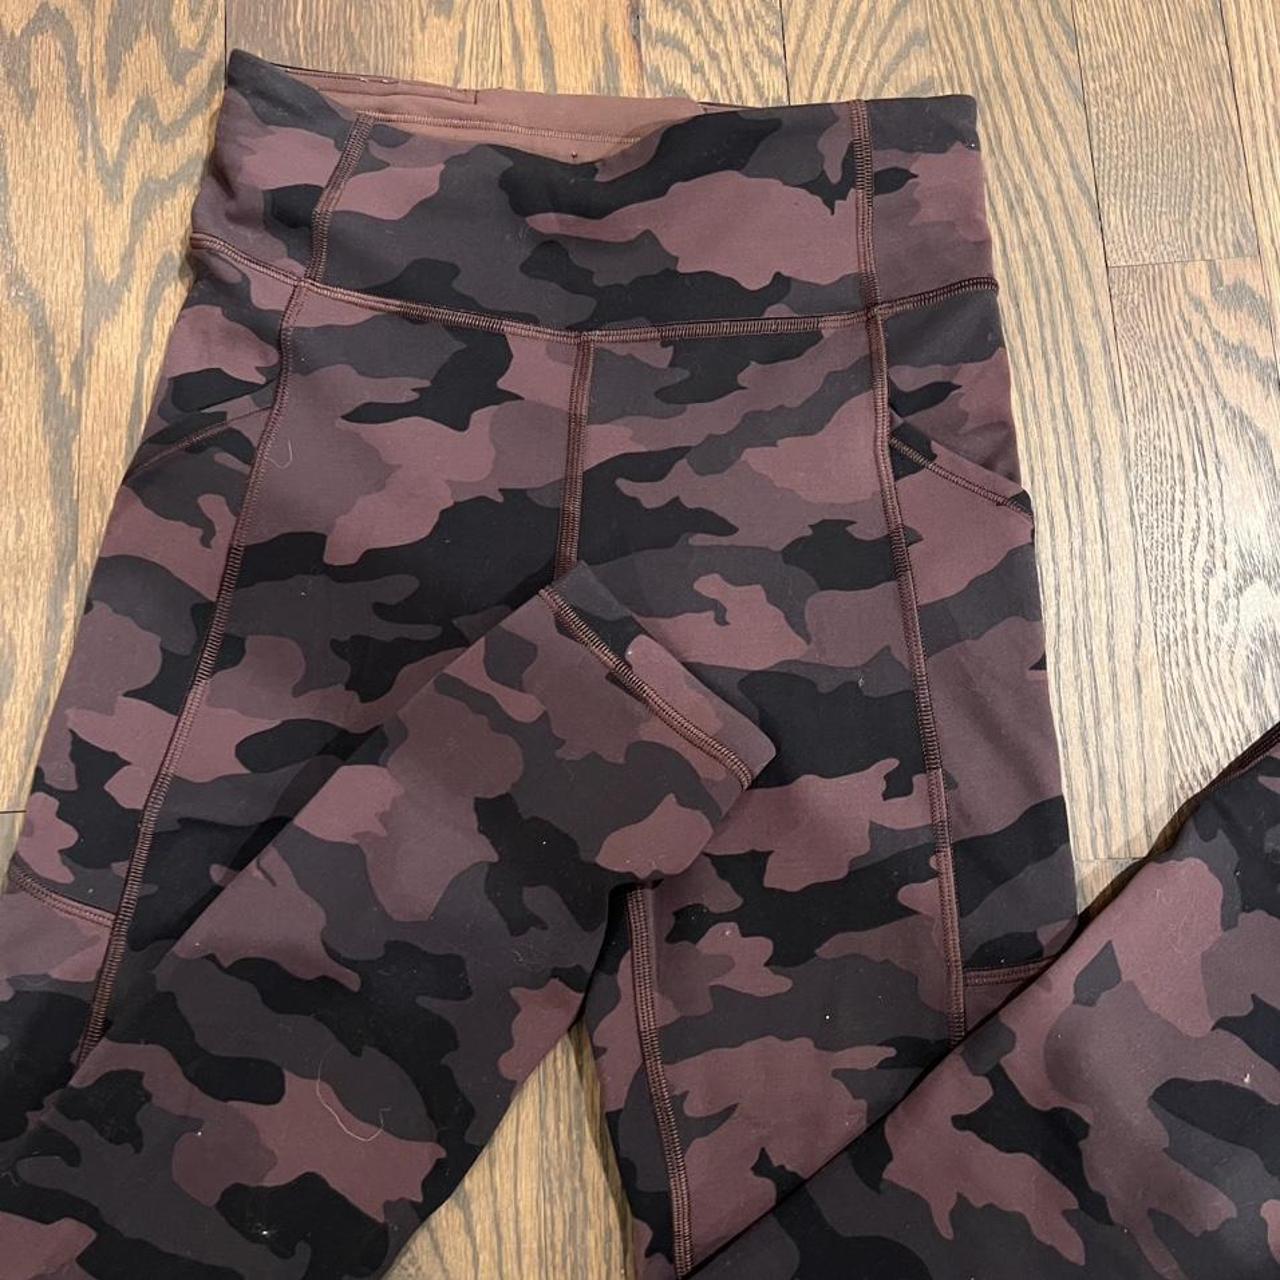 Lululemon fast and free leggings! Only worn twice.